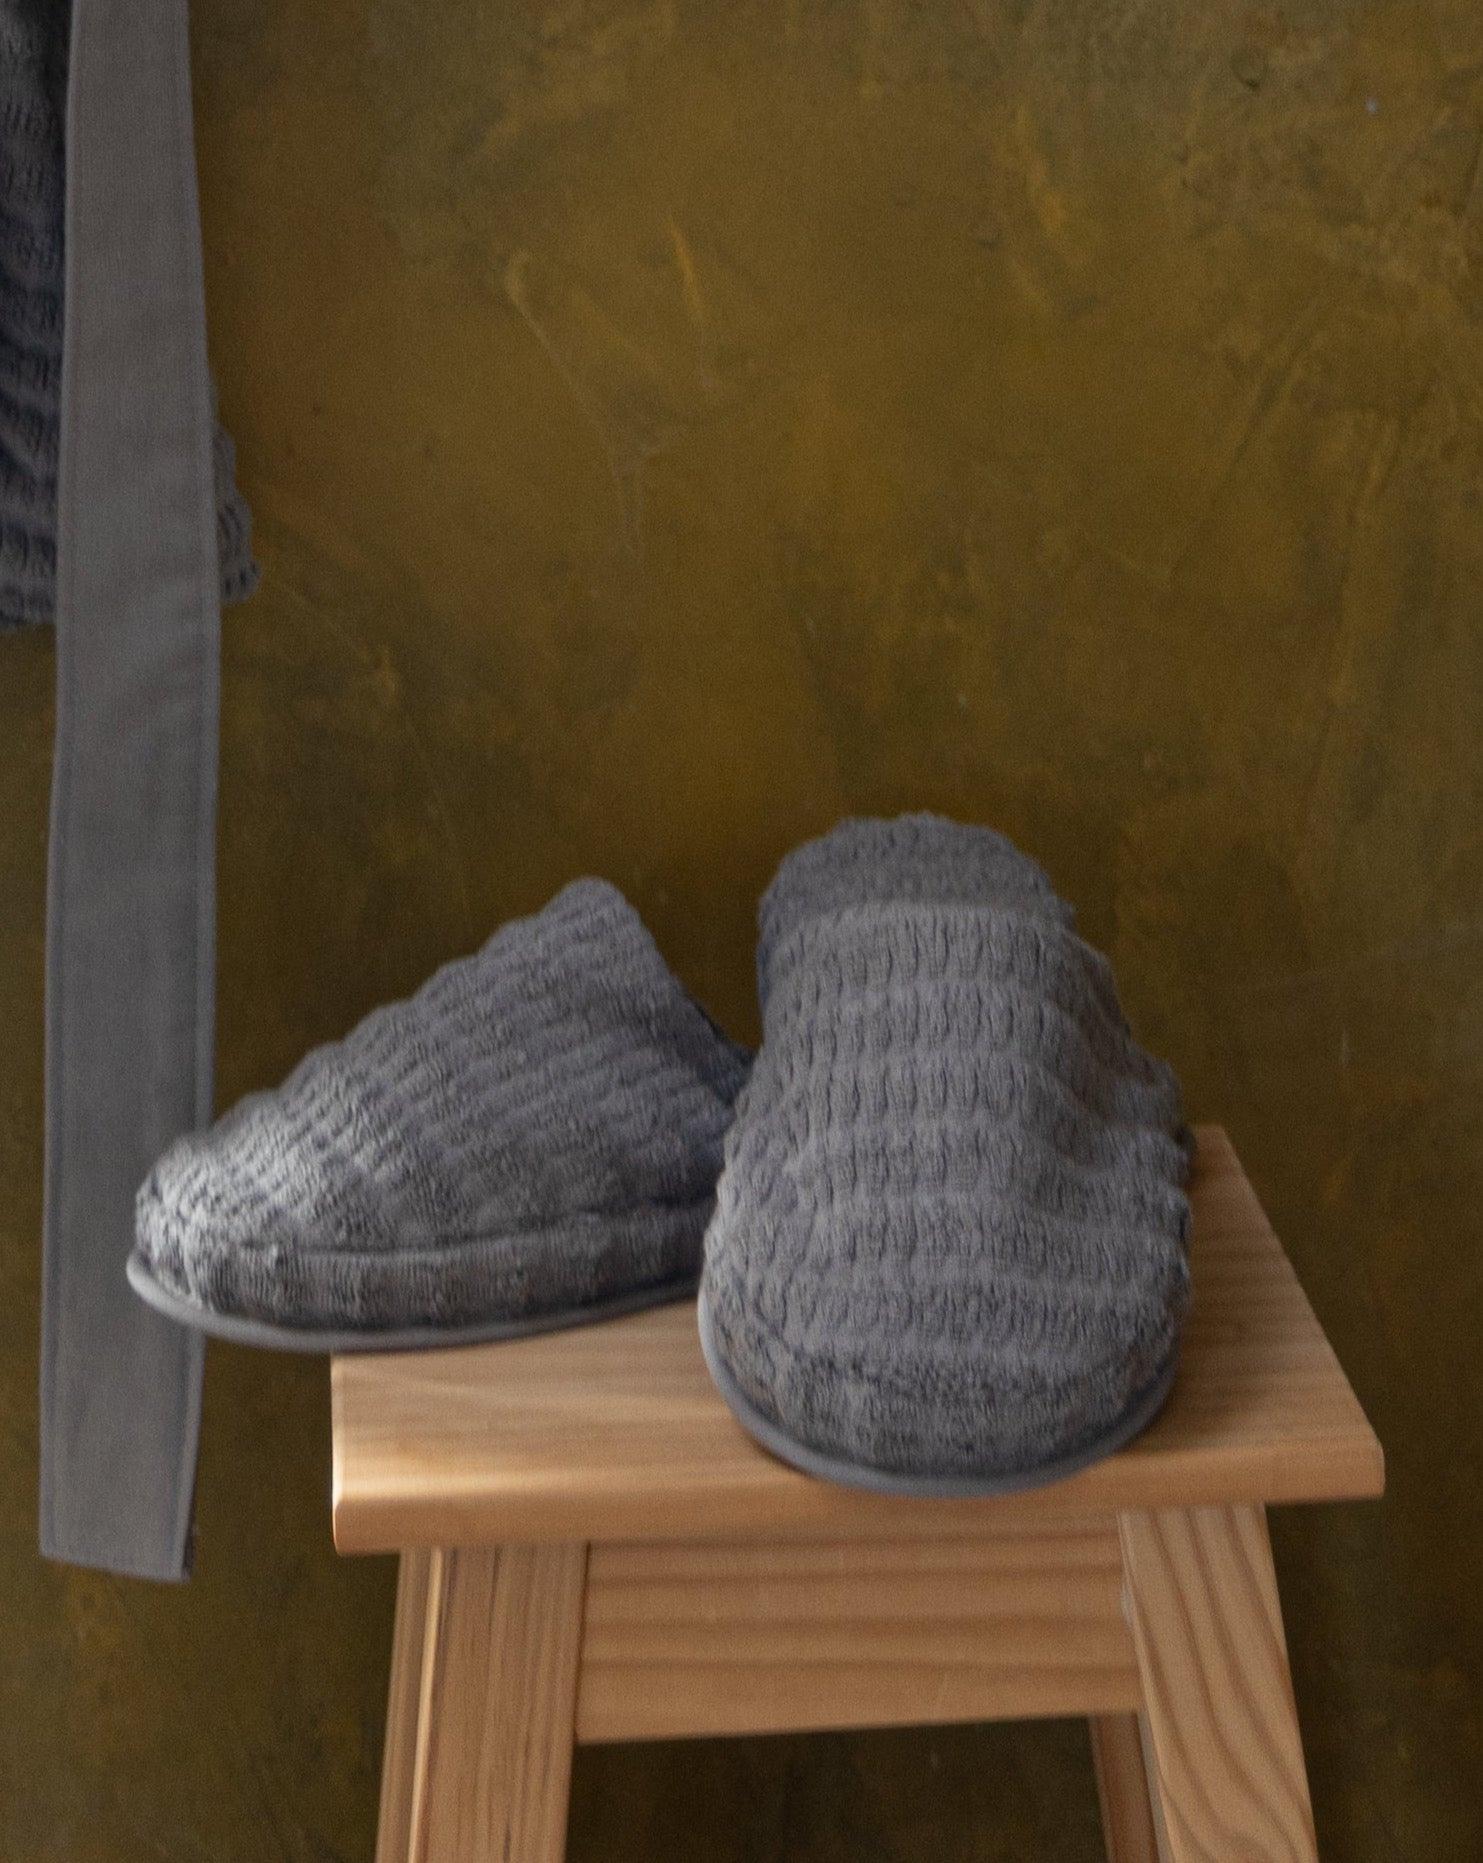 Grey Swell organic cotton slippers with a cozy, soft texture, displayed to showcase their comfort and minimalist design.